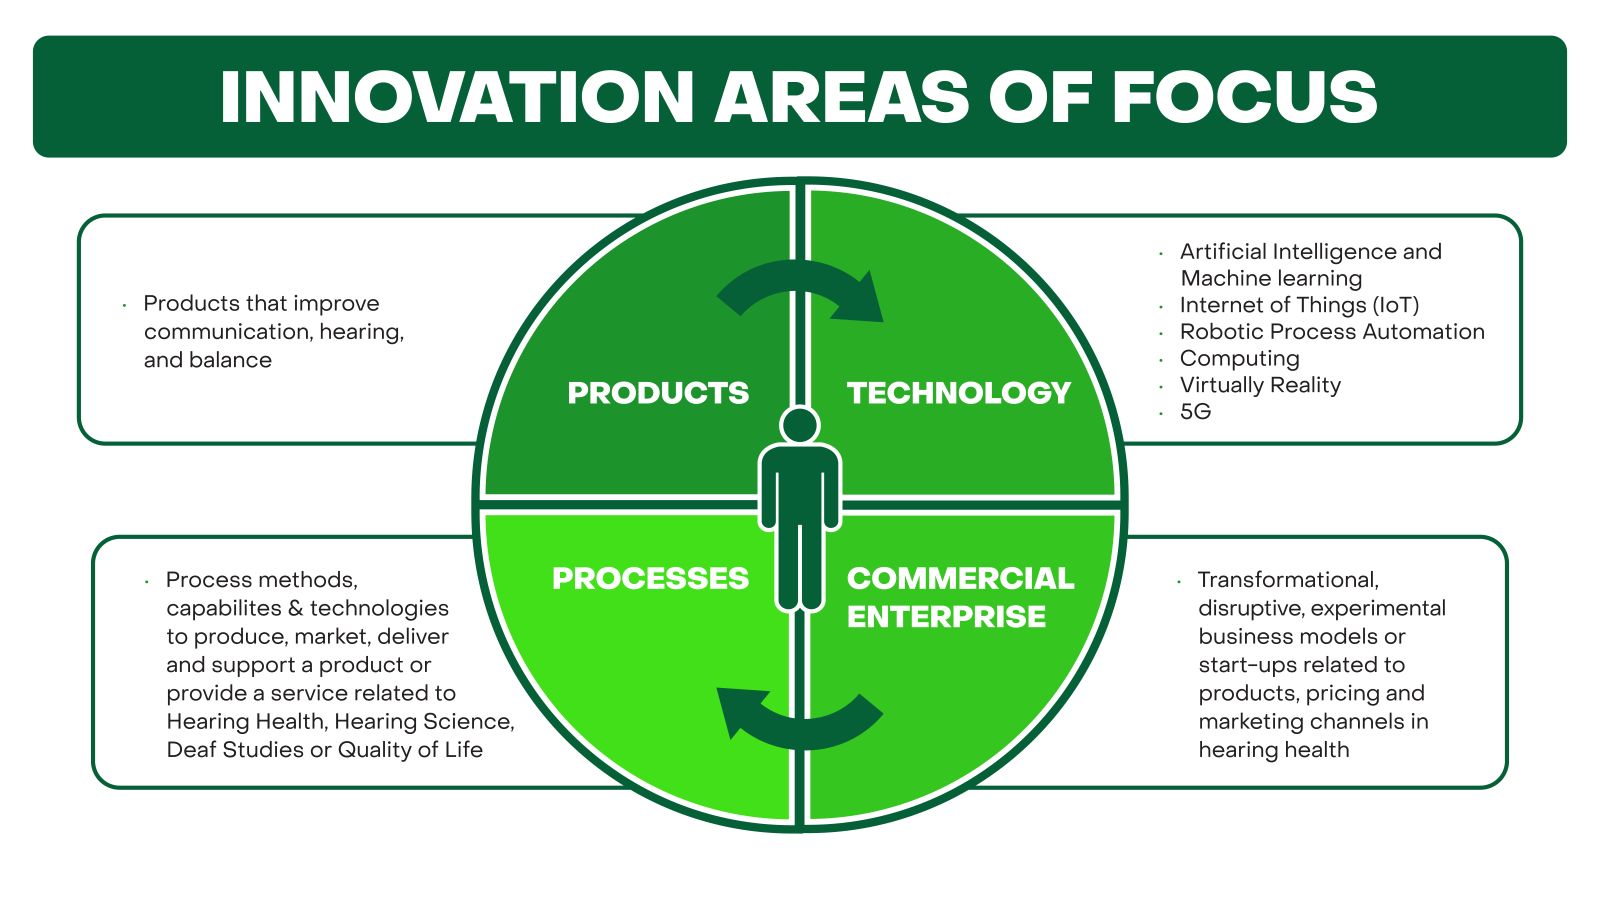 Innovation Areas of Focus chart